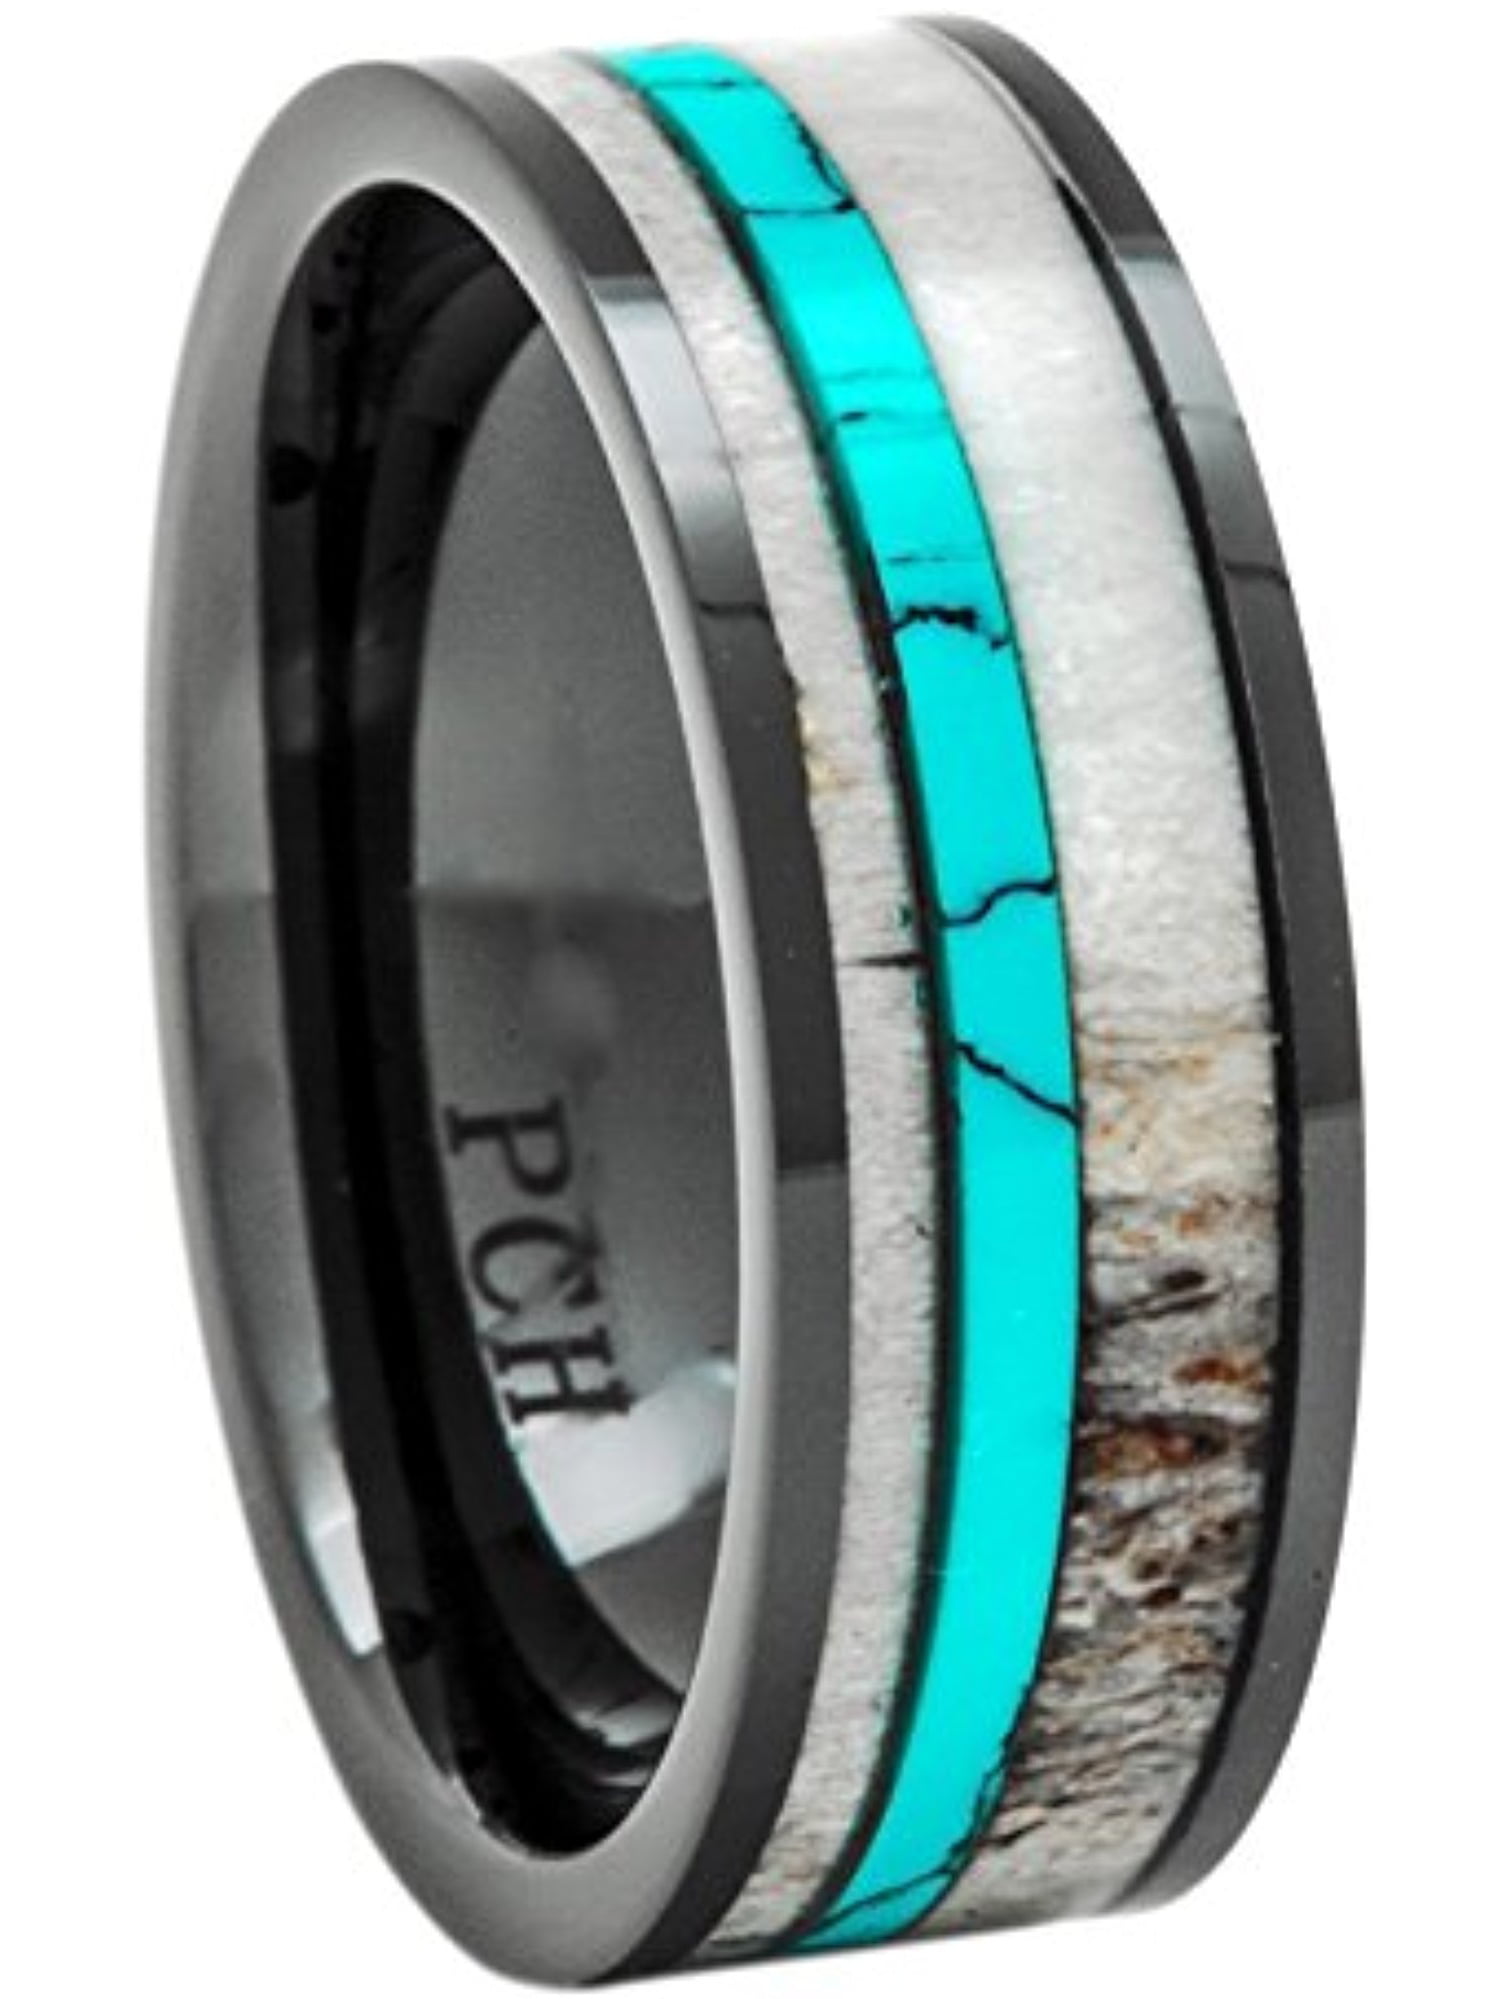 PCH Jewelers Deer Antler Ring Titanium Turquoise 8mm Wedding Band or Gift 